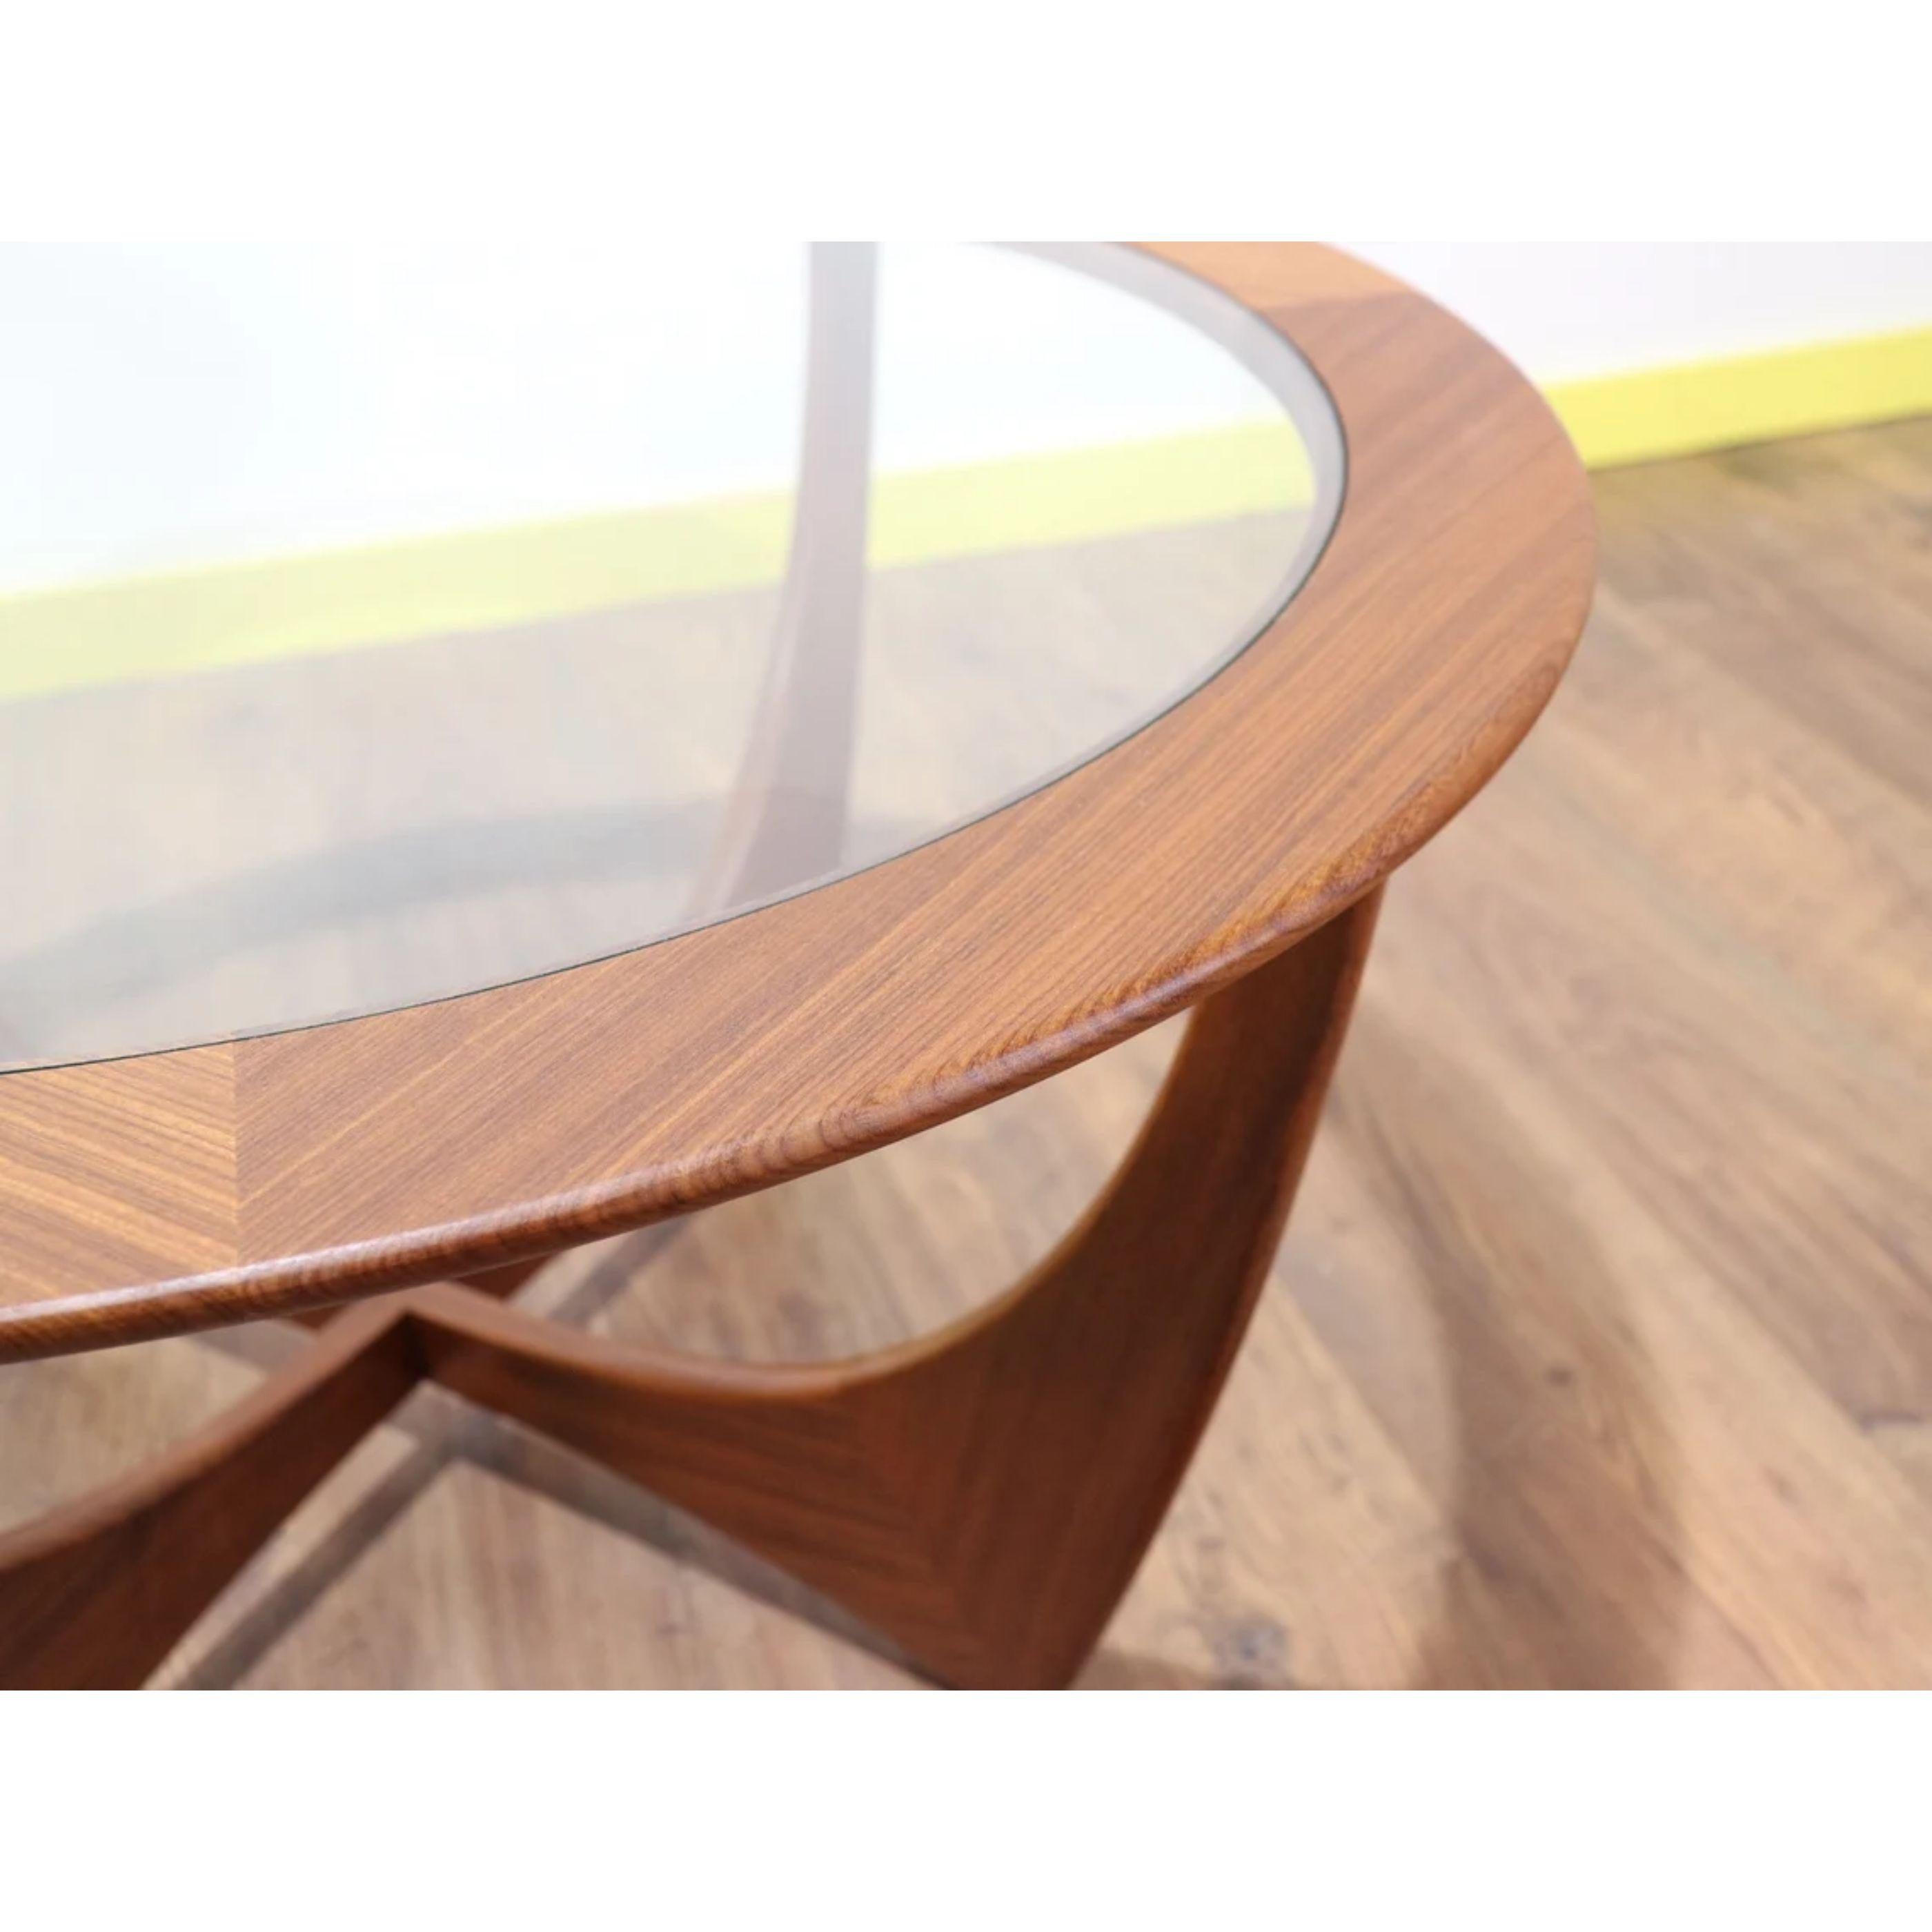 An iconic mid-century Astro coffee table by G-Plan from the 1960s. A unique and beautiful sculptural coffee table designed by Victor Wilkins and manufactured by Gplan in England. The beautiful legs really set this table apart.

Dimension:

W 33